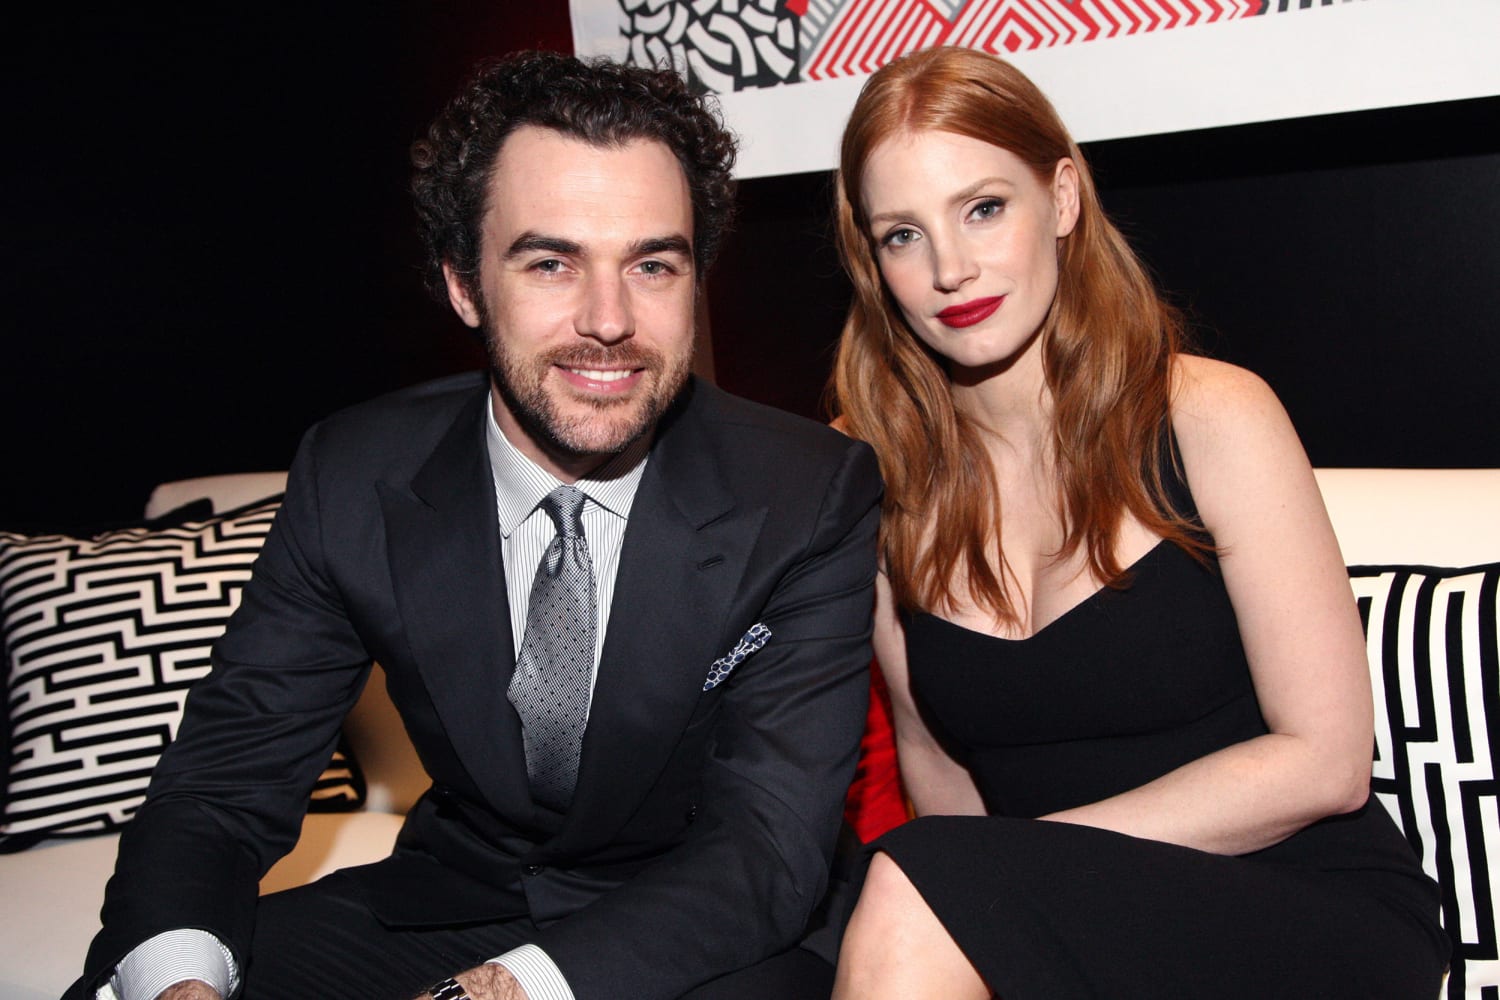 Chastain dating jessica Jessica Chastain